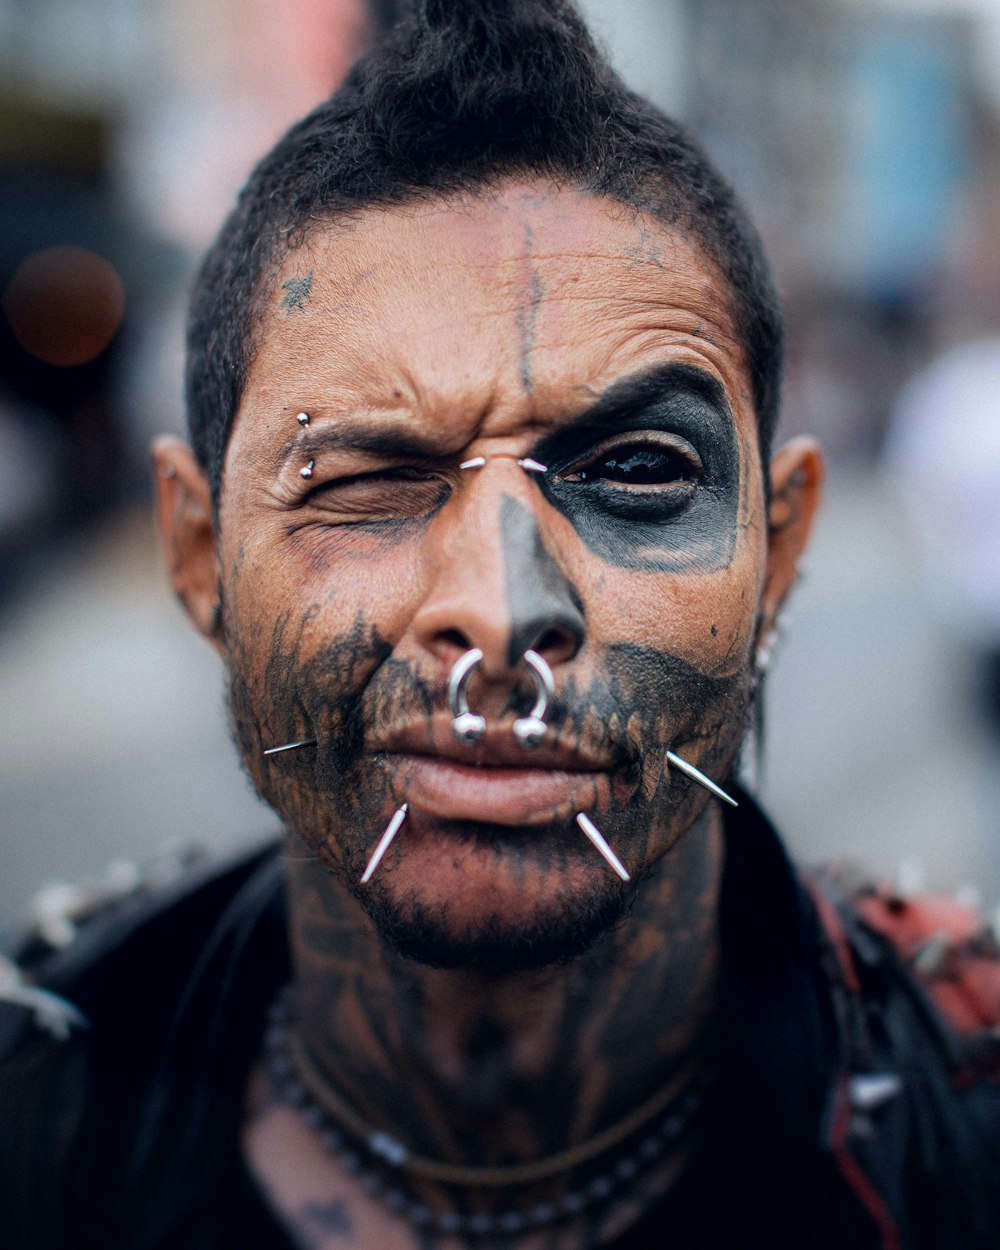 a man with black face paint and piercings on his nose